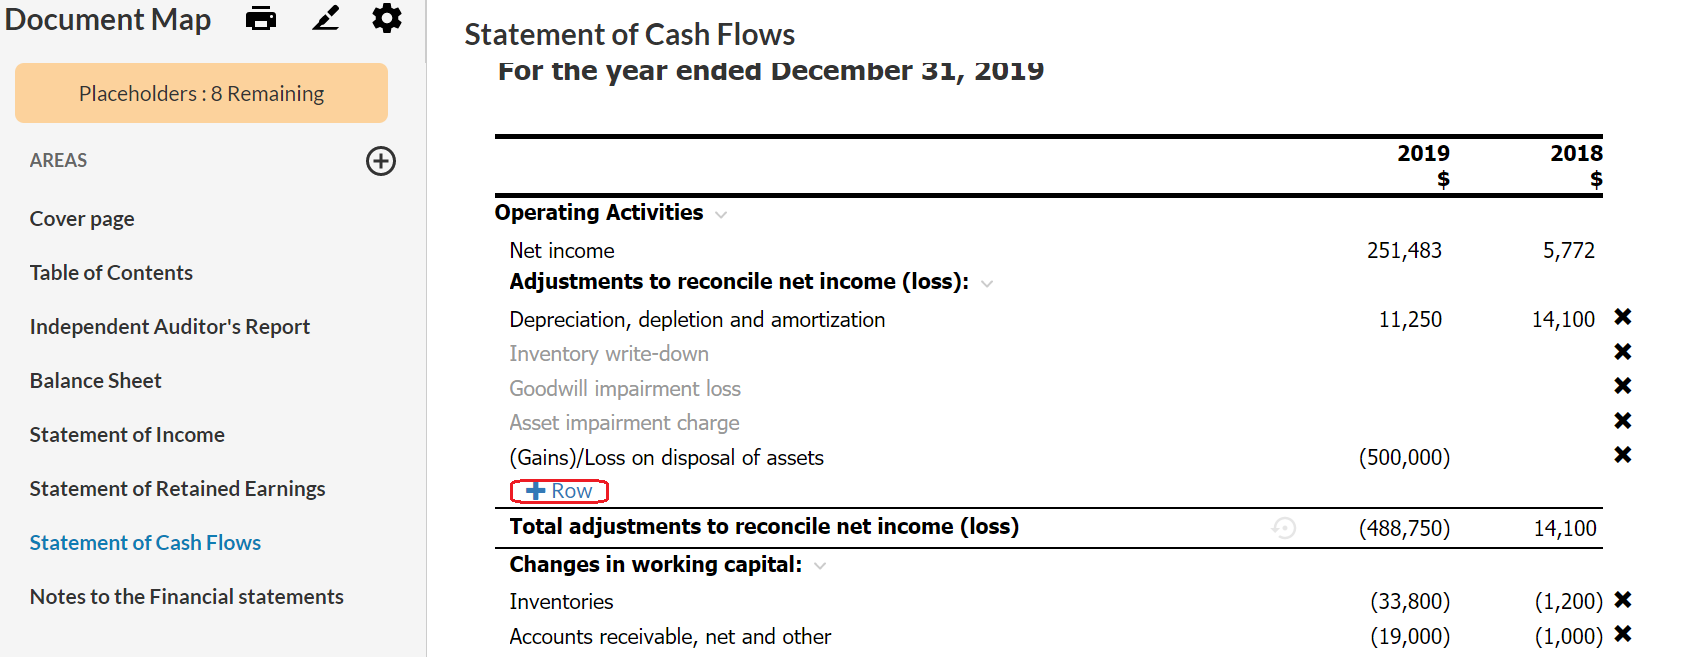 Statement of Cash Flows including the +Row button so staff can include additonal rows if needed.